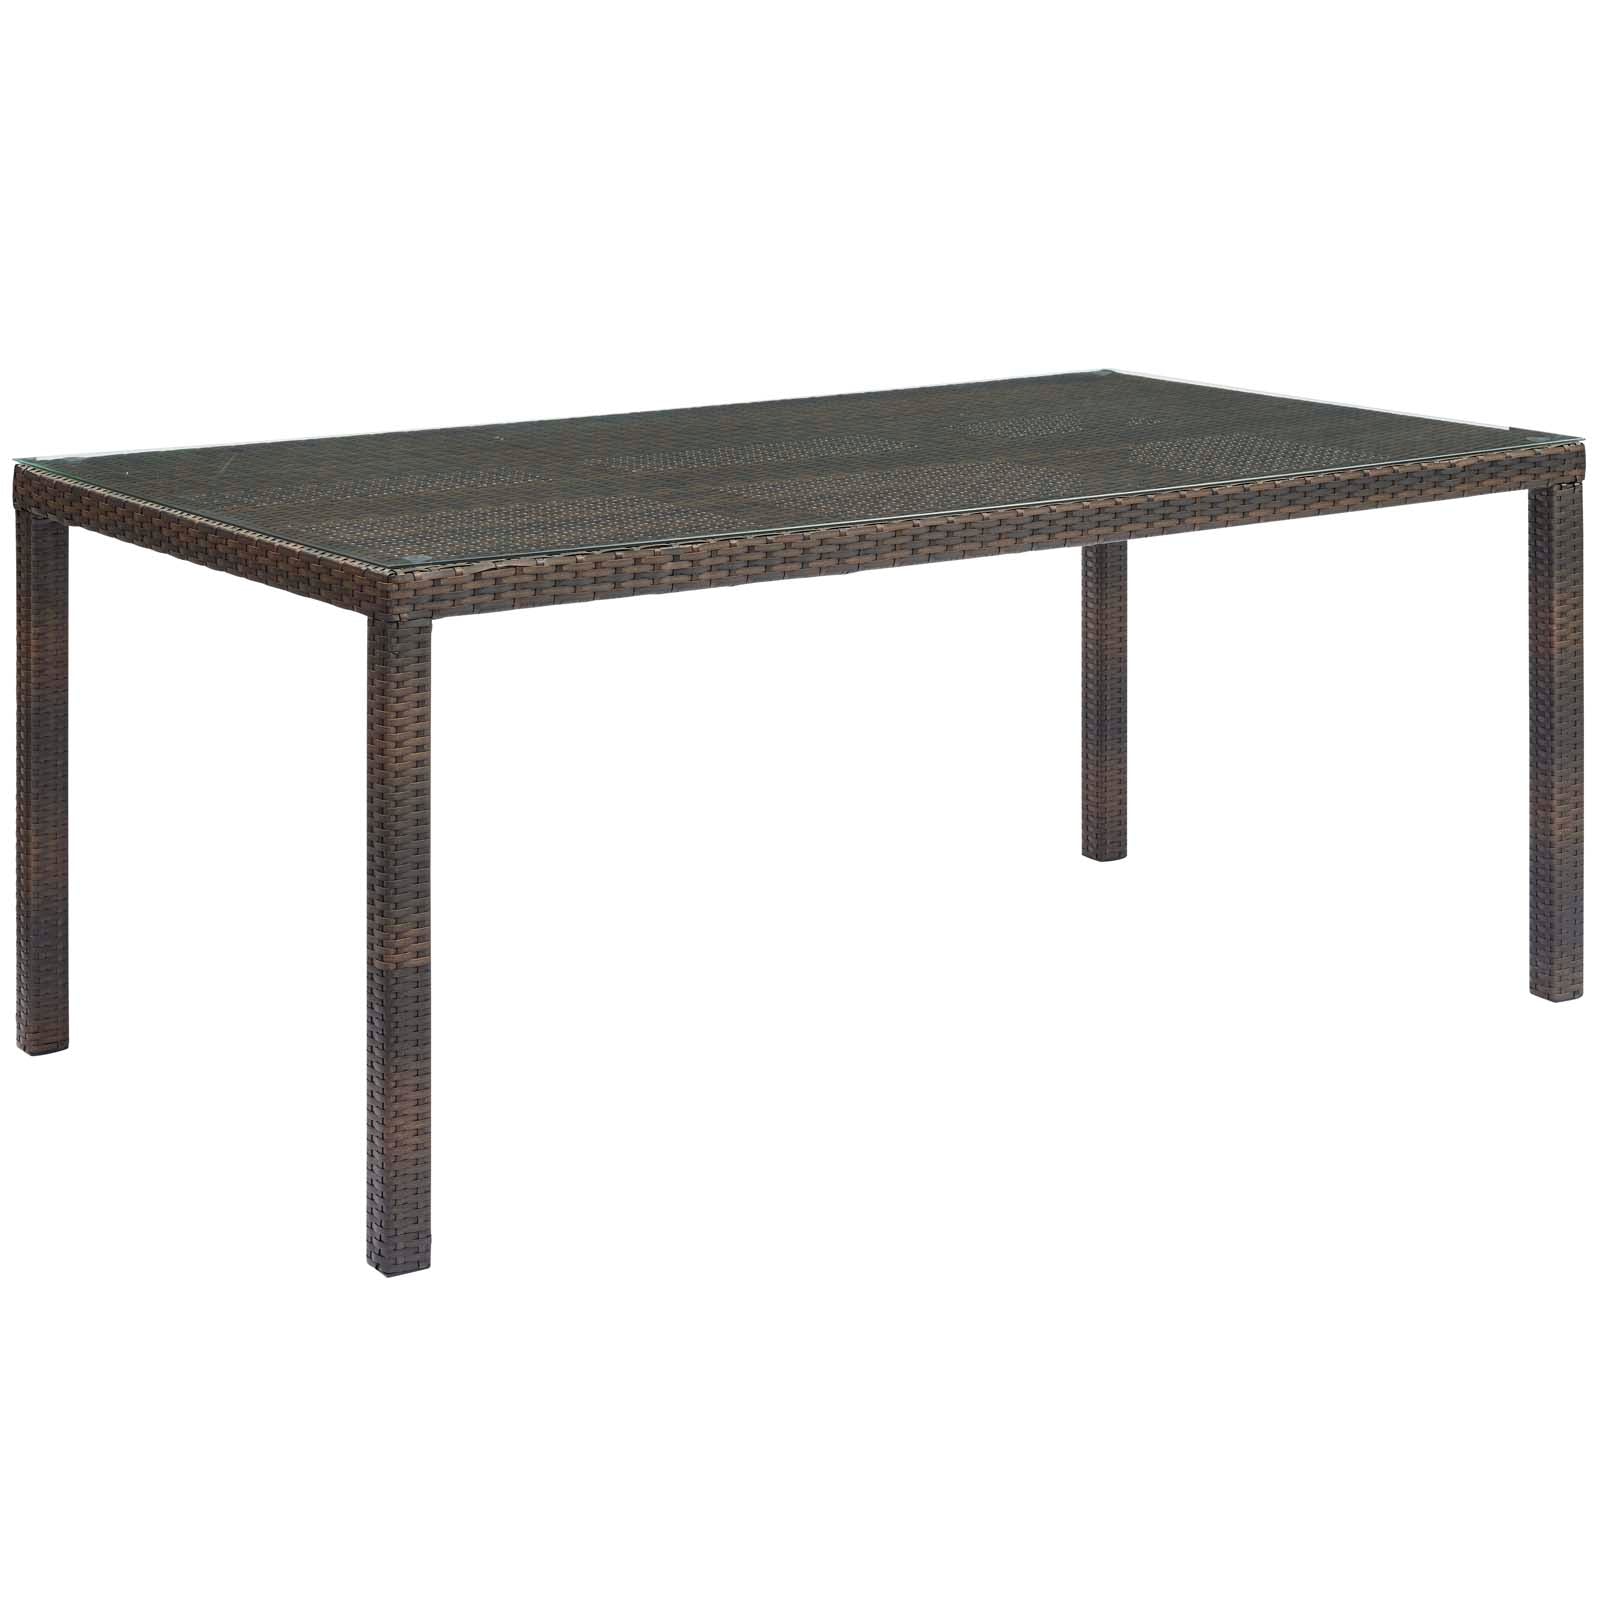 Conduit 70" Outdoor Patio Wicker Rattan Dining Table - East Shore Modern Home Furnishings